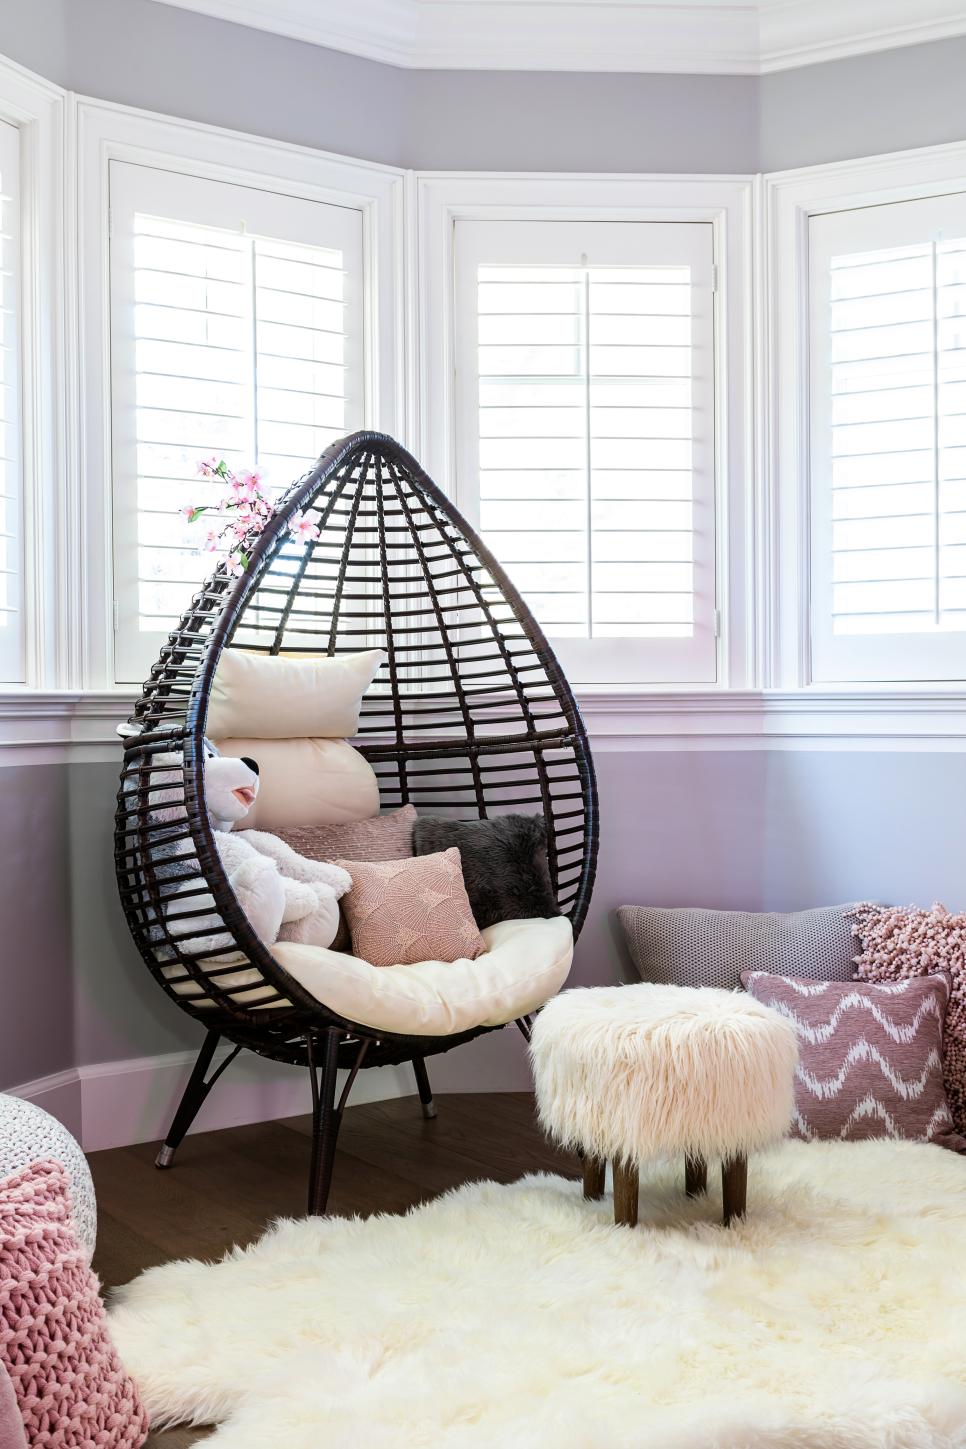 Reading Nook With Teardrop Chair, Faux-Fur Pillows | HGTV